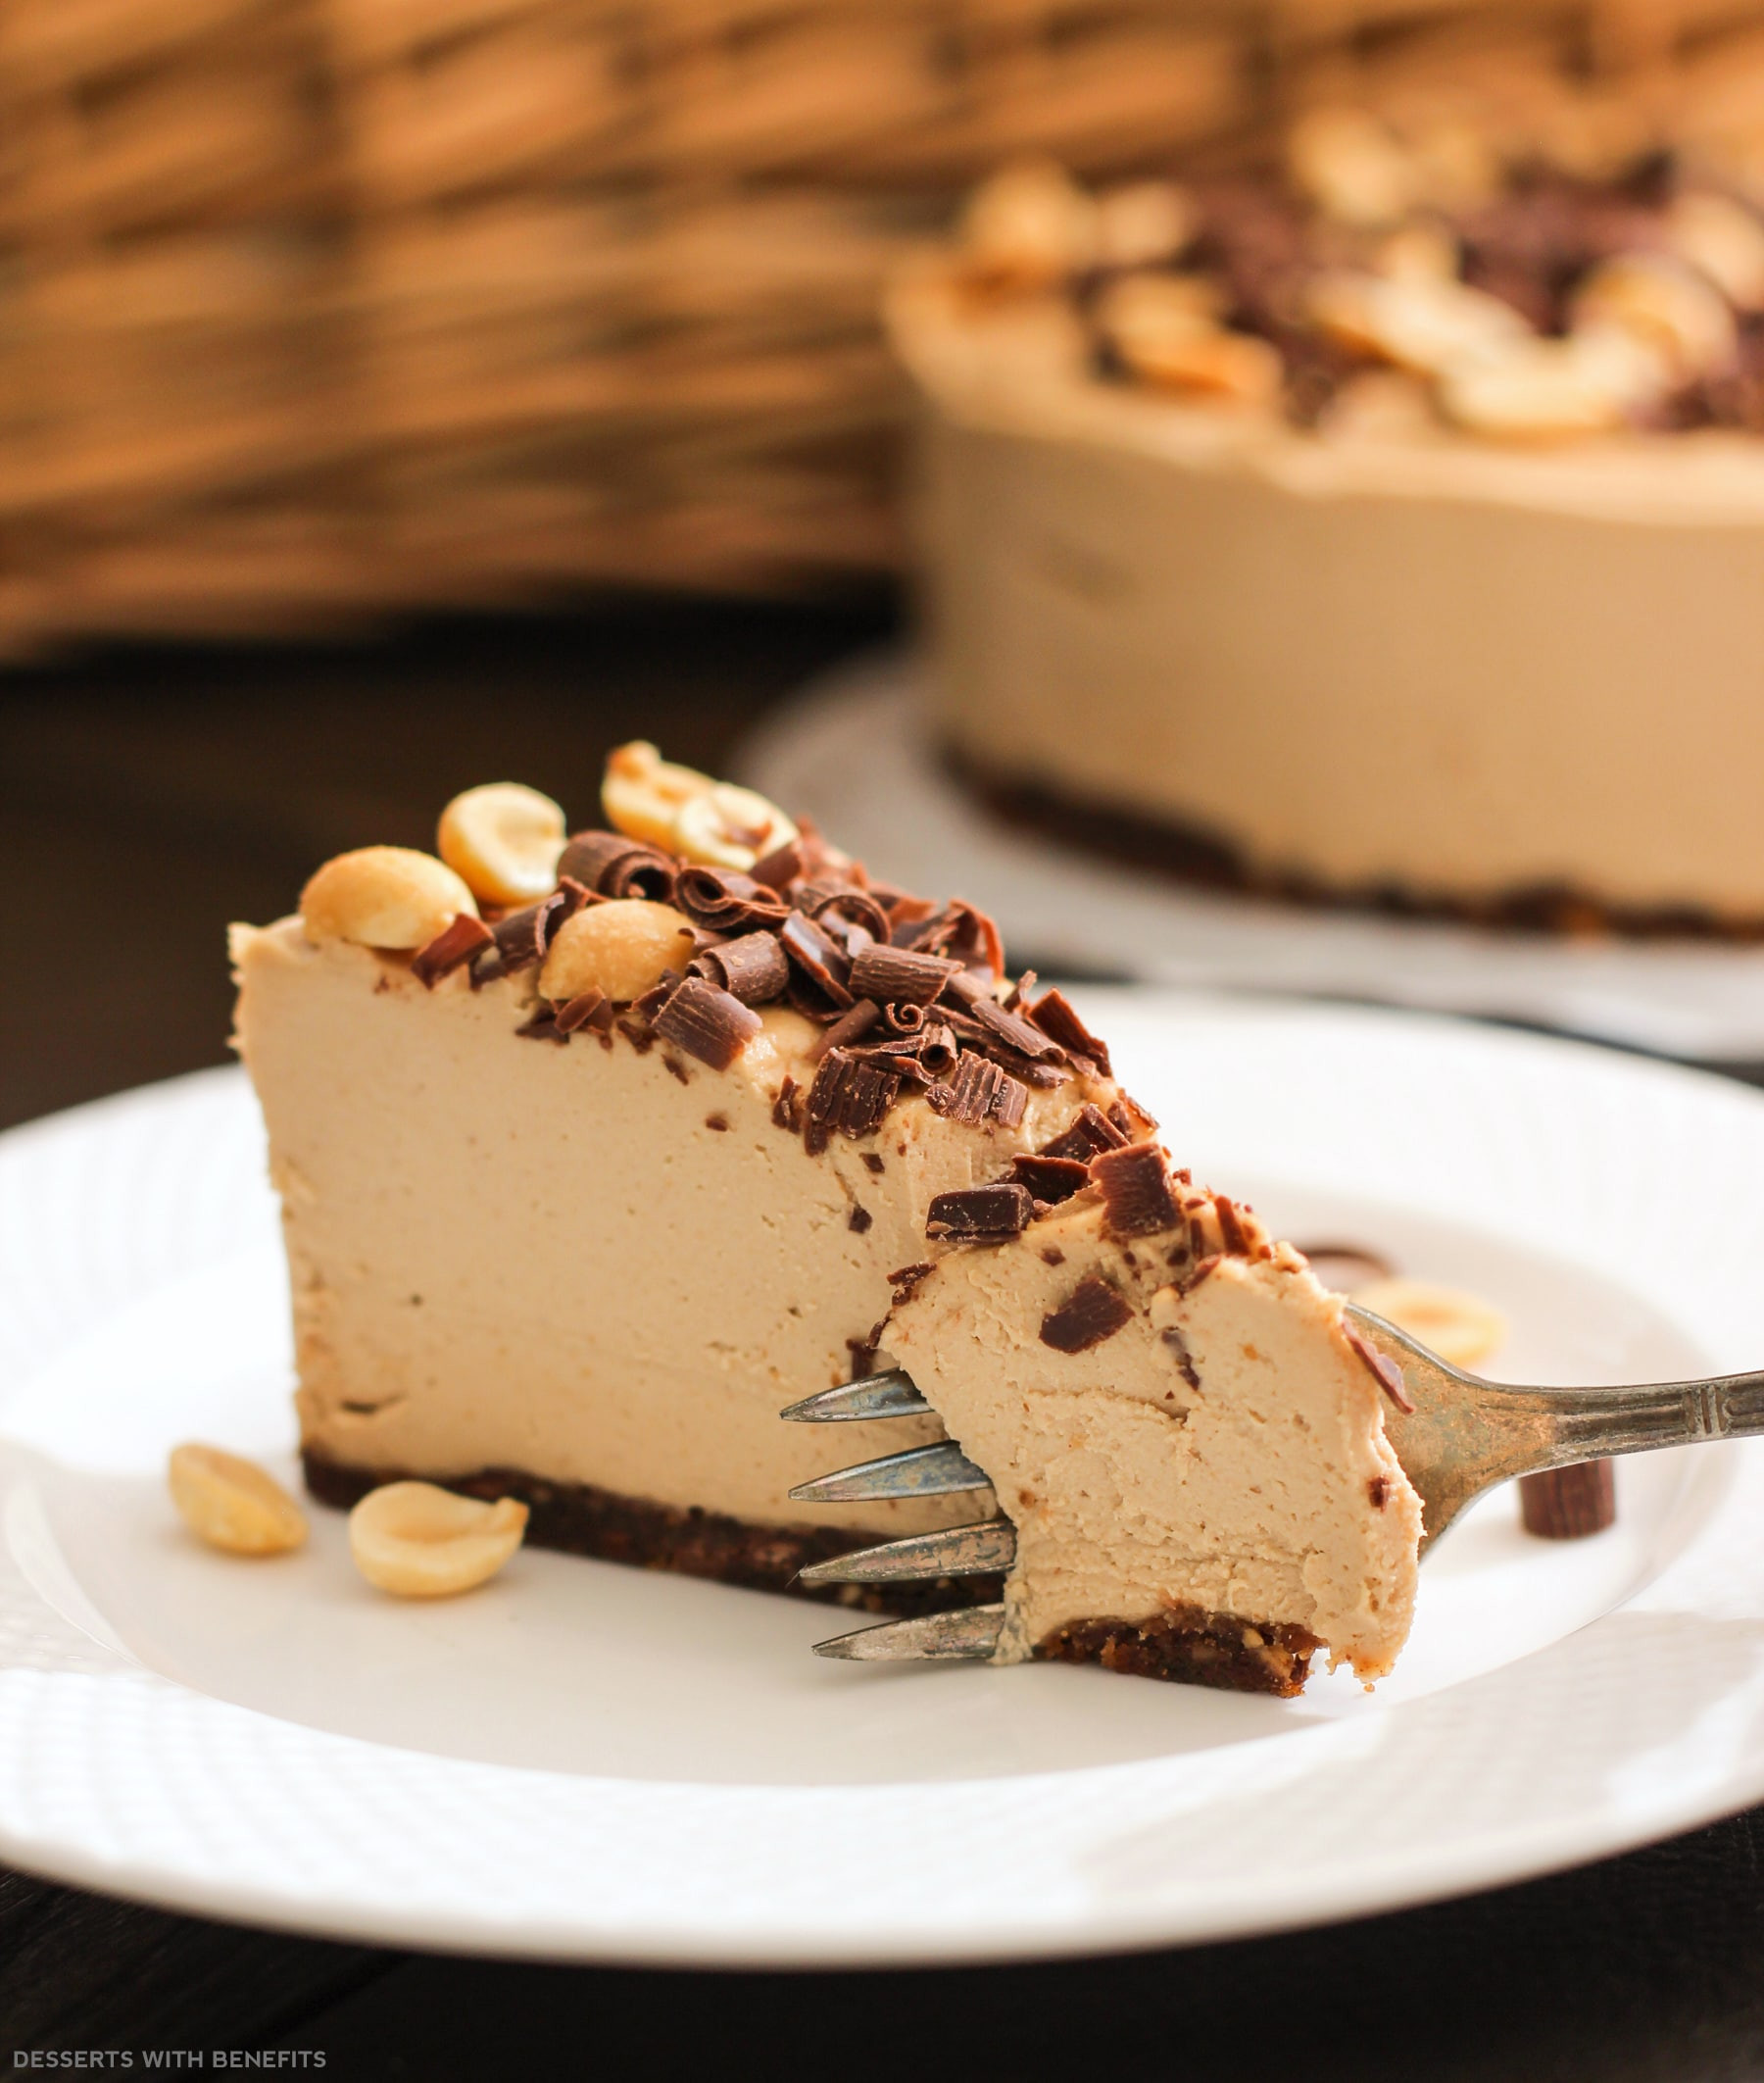 Healthy No Bake Desserts
 Healthy Chocolate Peanut Butter Raw Cheesecake